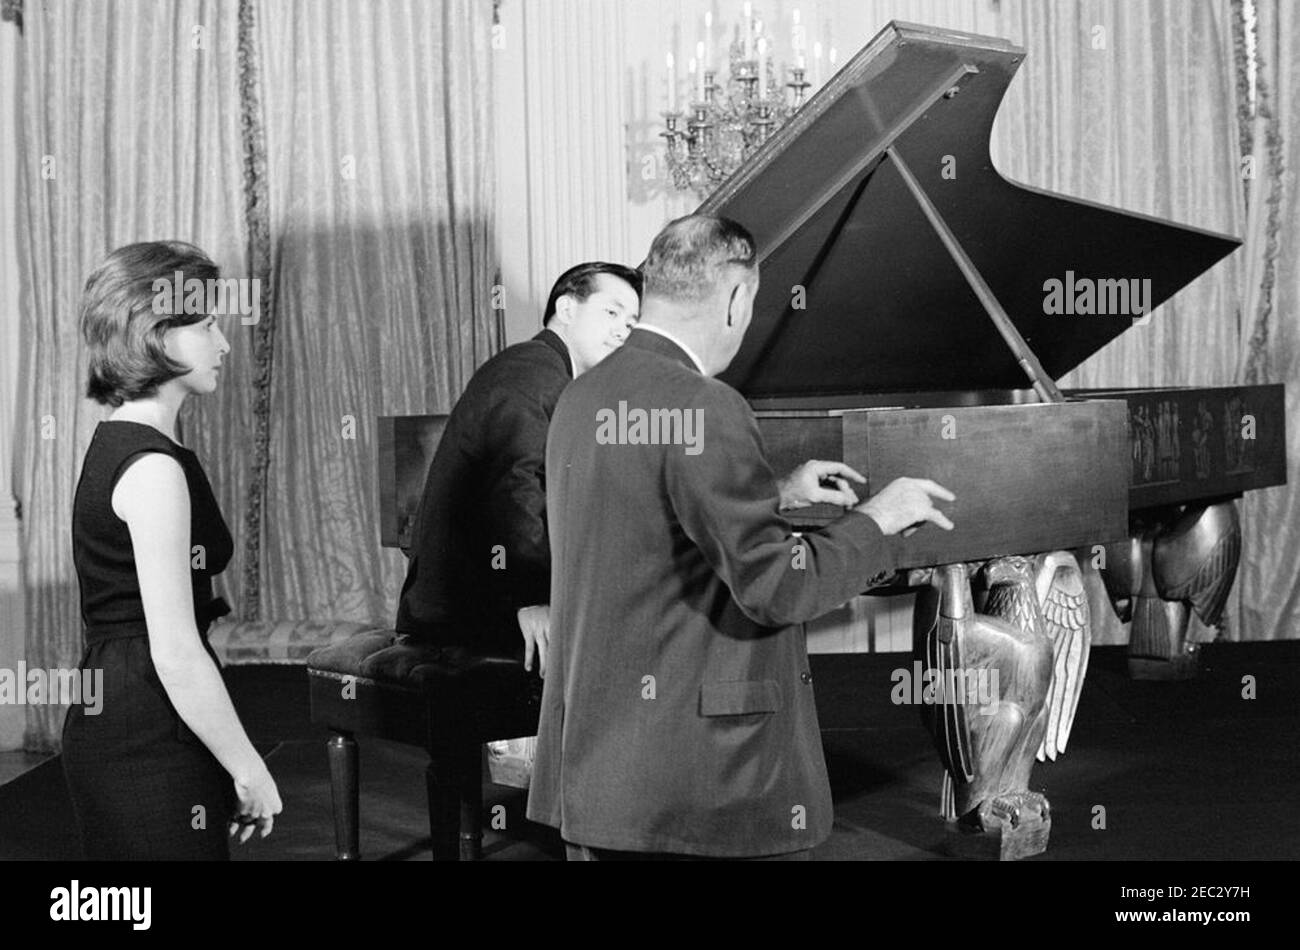 First Lady Jacqueline Kennedyu0027s (JBK) Musical Program for Youth. Korean pianist, Tong-il Han (seated at piano), rehearses in the East Room of the White House, Washington, D.C., prior to performing at the fifth installment of First Lady Jacqueline Kennedyu0027s Musical Programs for Youth by Youth. An unidentified man (back to camera, standing right of Mr. Han) mimes playing the piano; First Ladyu2019s Press Secretary, Pamela Turnure, looks on from left. Mrs. Kennedy held the event for the children of ambassadors, members of Cabinet, and State Department officials living in Washington, D. Stock Photo